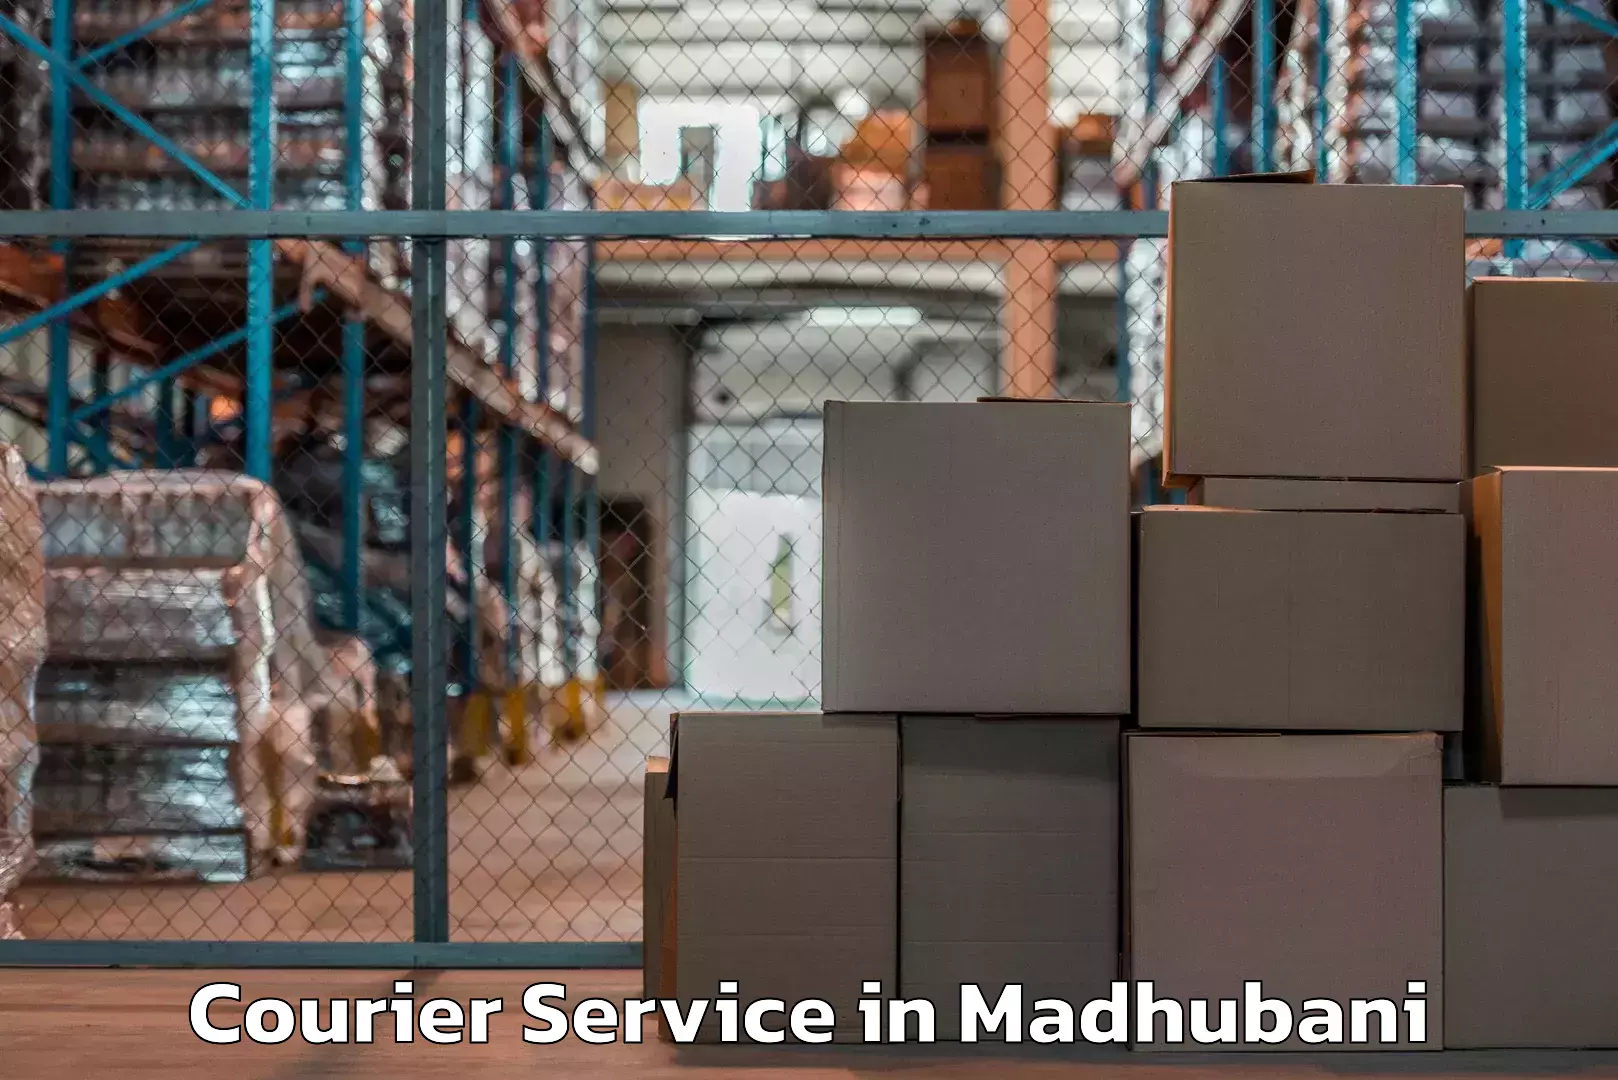 Parcel delivery in Madhubani